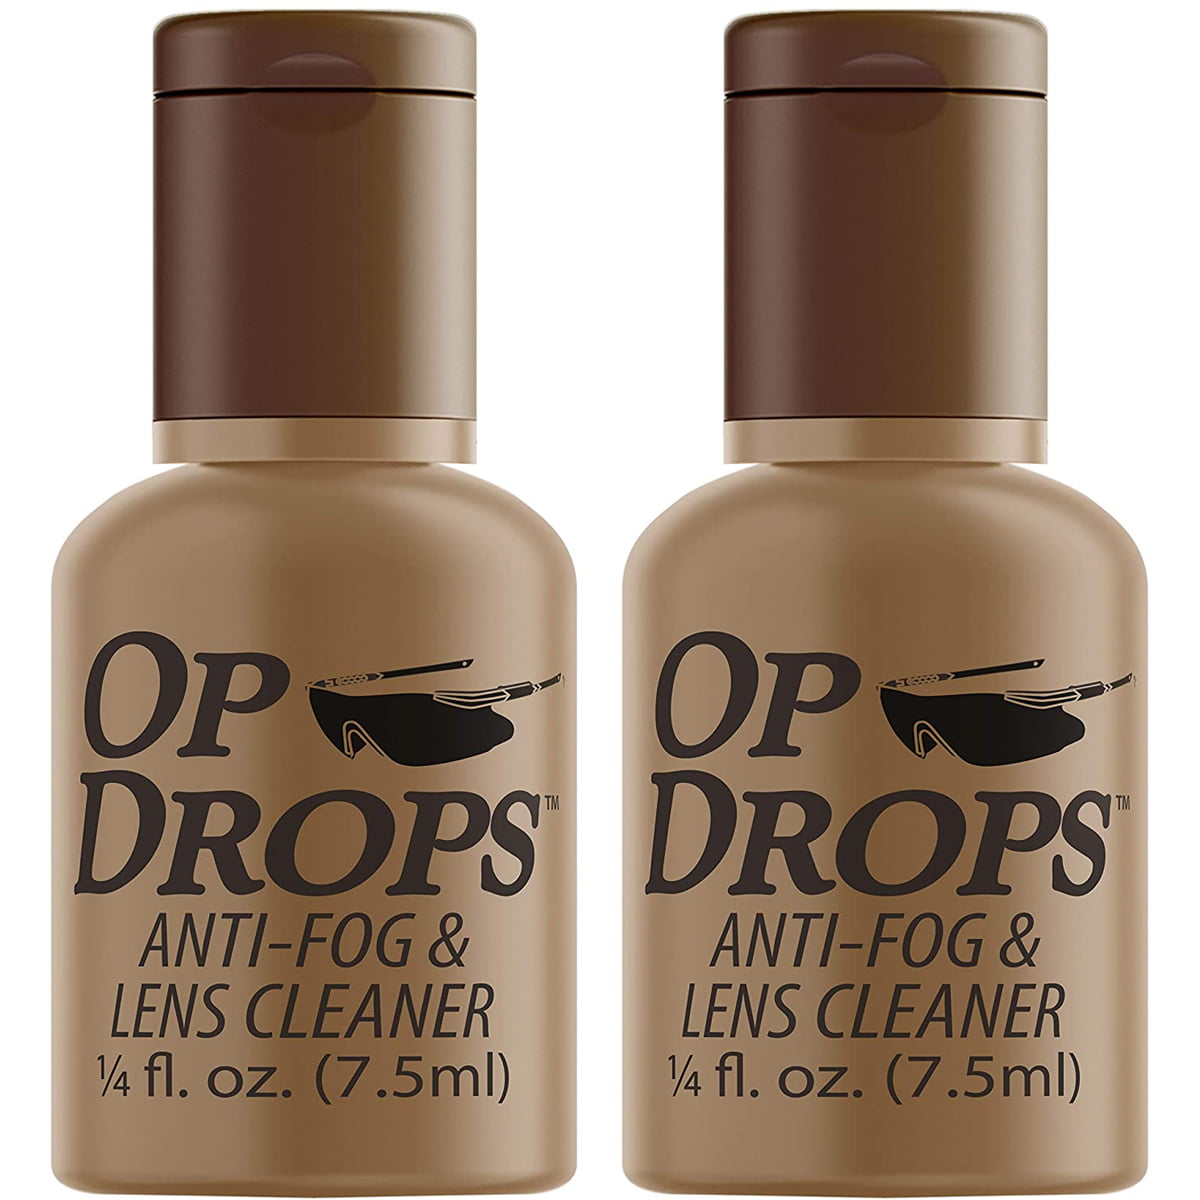 Gear Aid 40220 Op Drops Anti-fog & Lens Cleaning Kit for sale online 